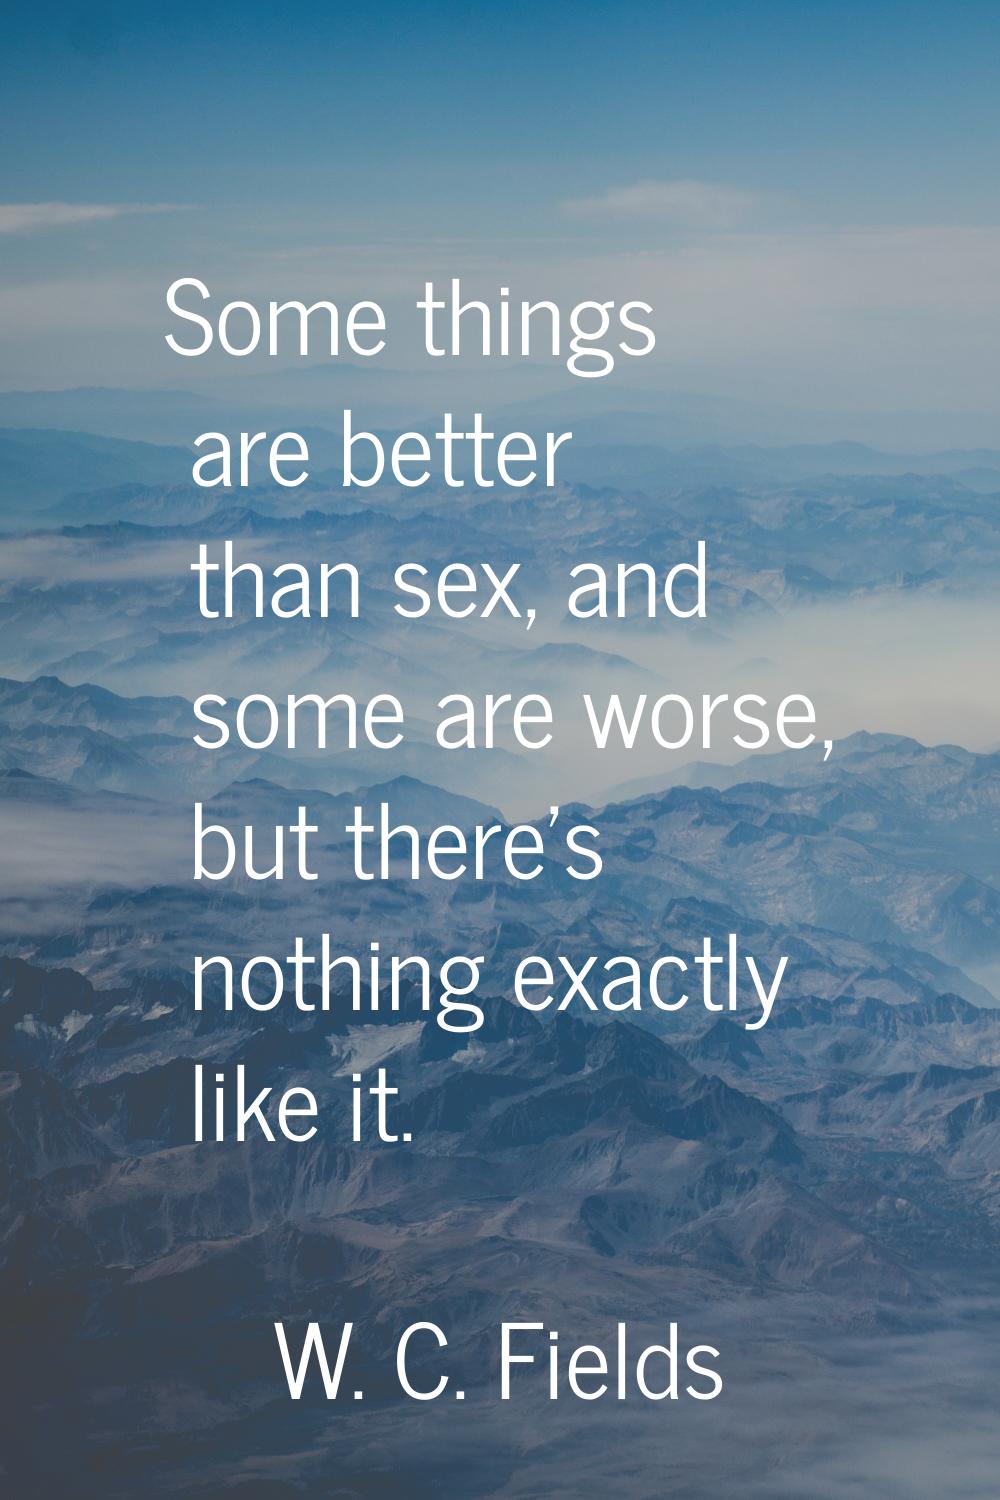 Some things are better than sex, and some are worse, but there's nothing exactly like it.